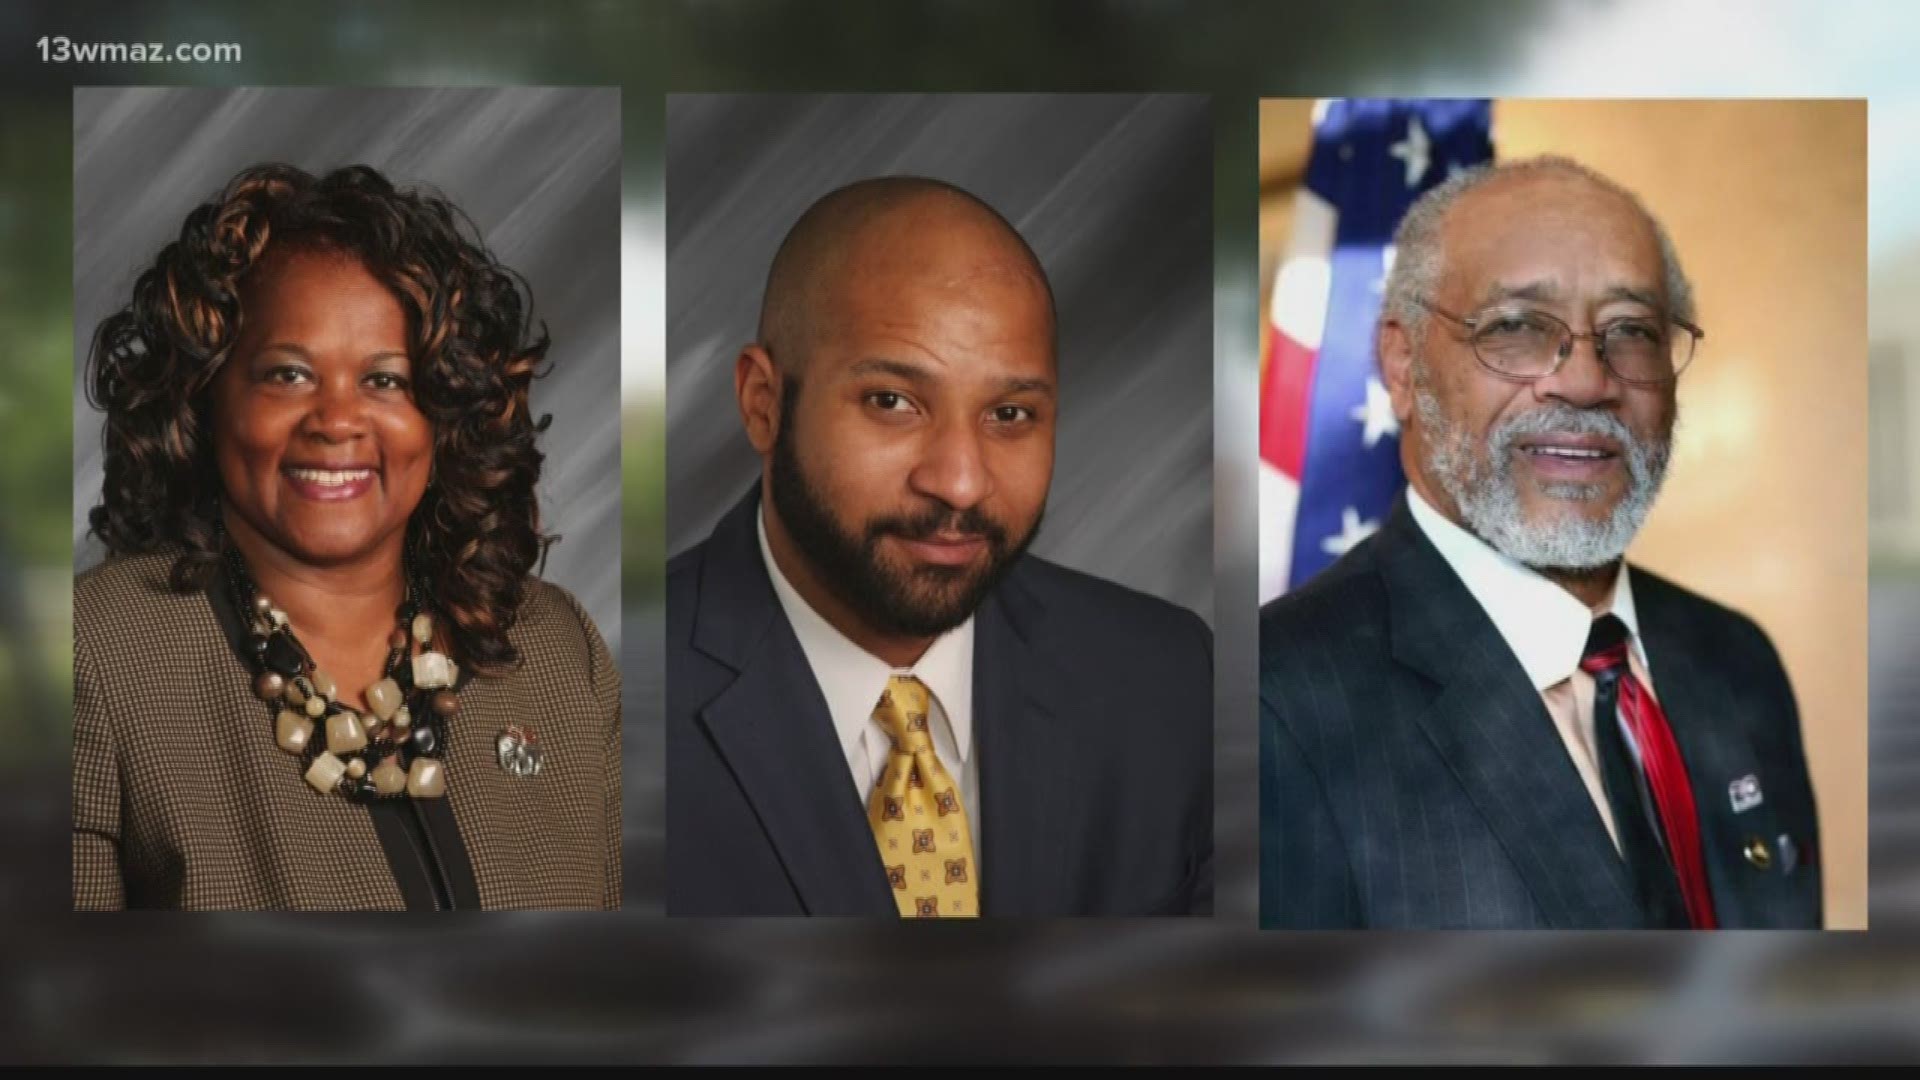 A Macon man filed ethics complaints against three Macon elected officials, and Thursday, one of them fired back saying the man had ulterior motives.